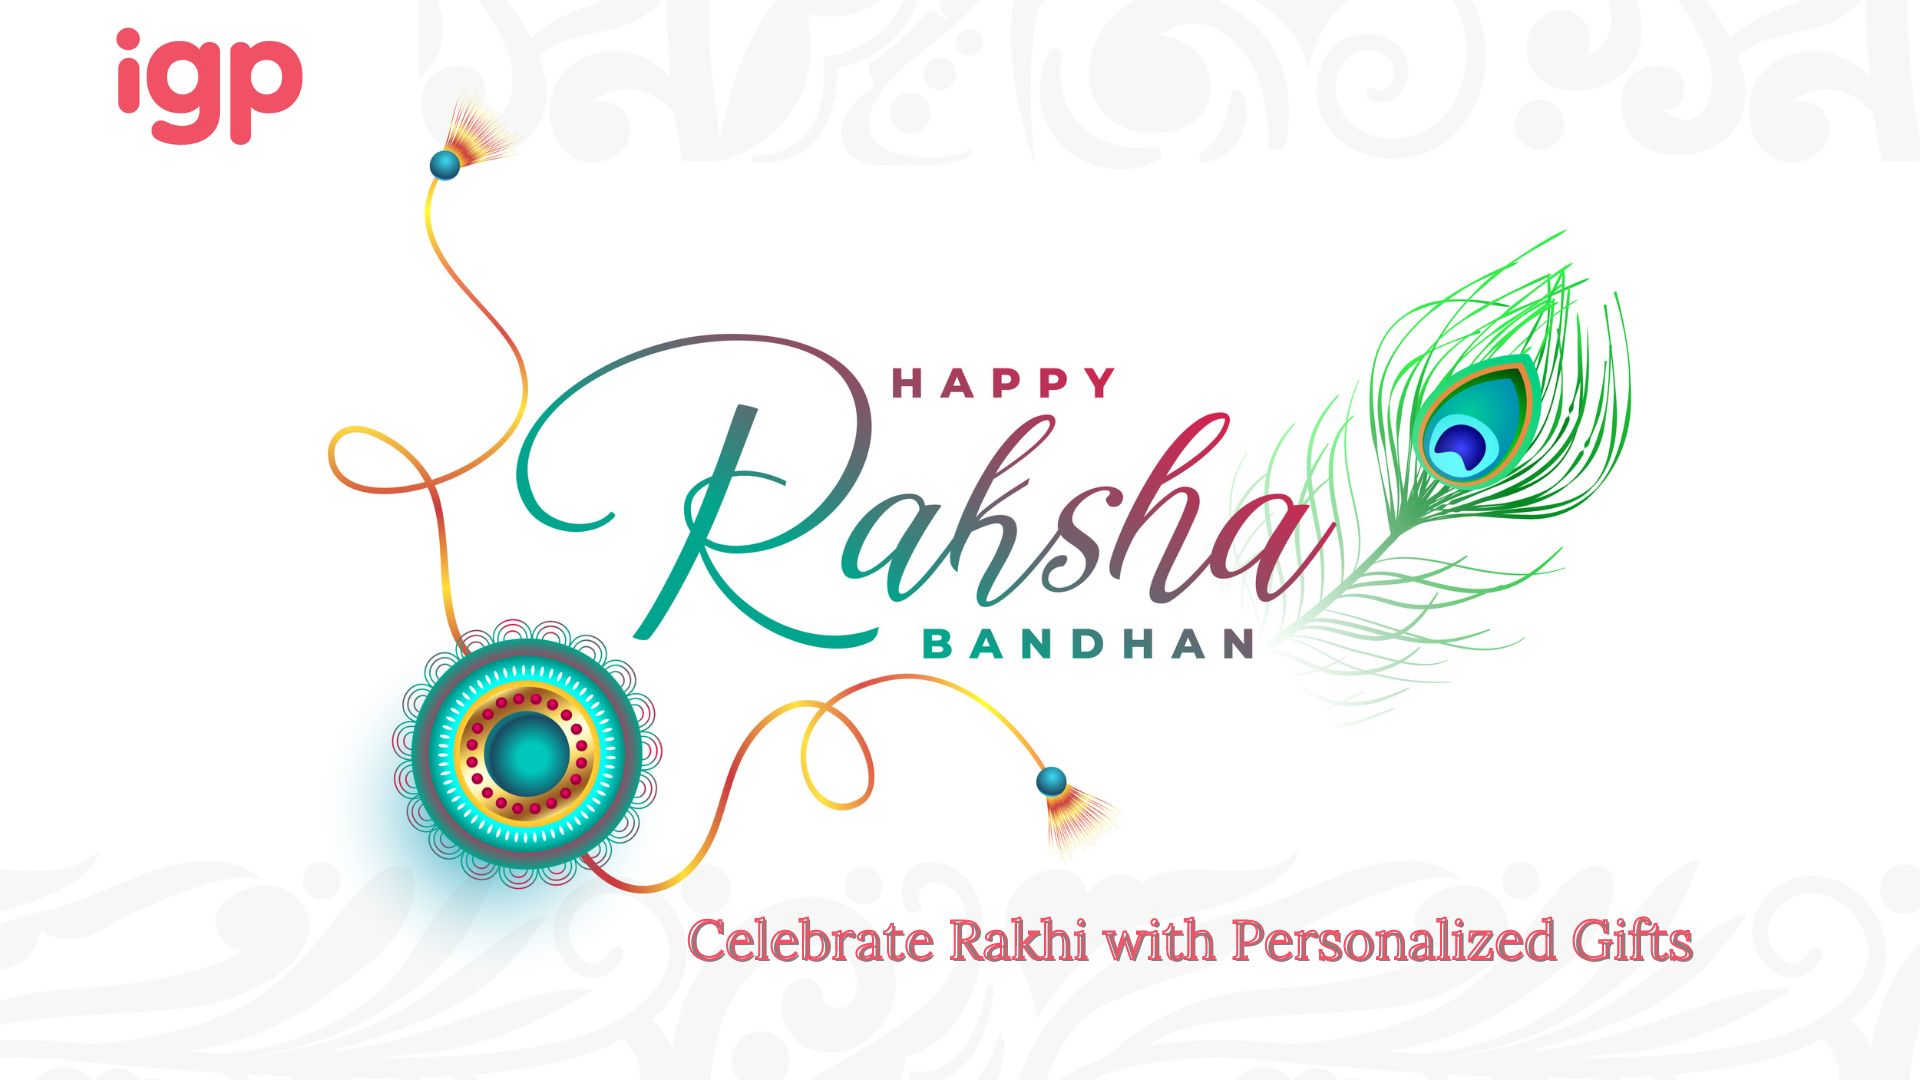 Celebrate Rakhi with Special Personalized Gifts from IGP